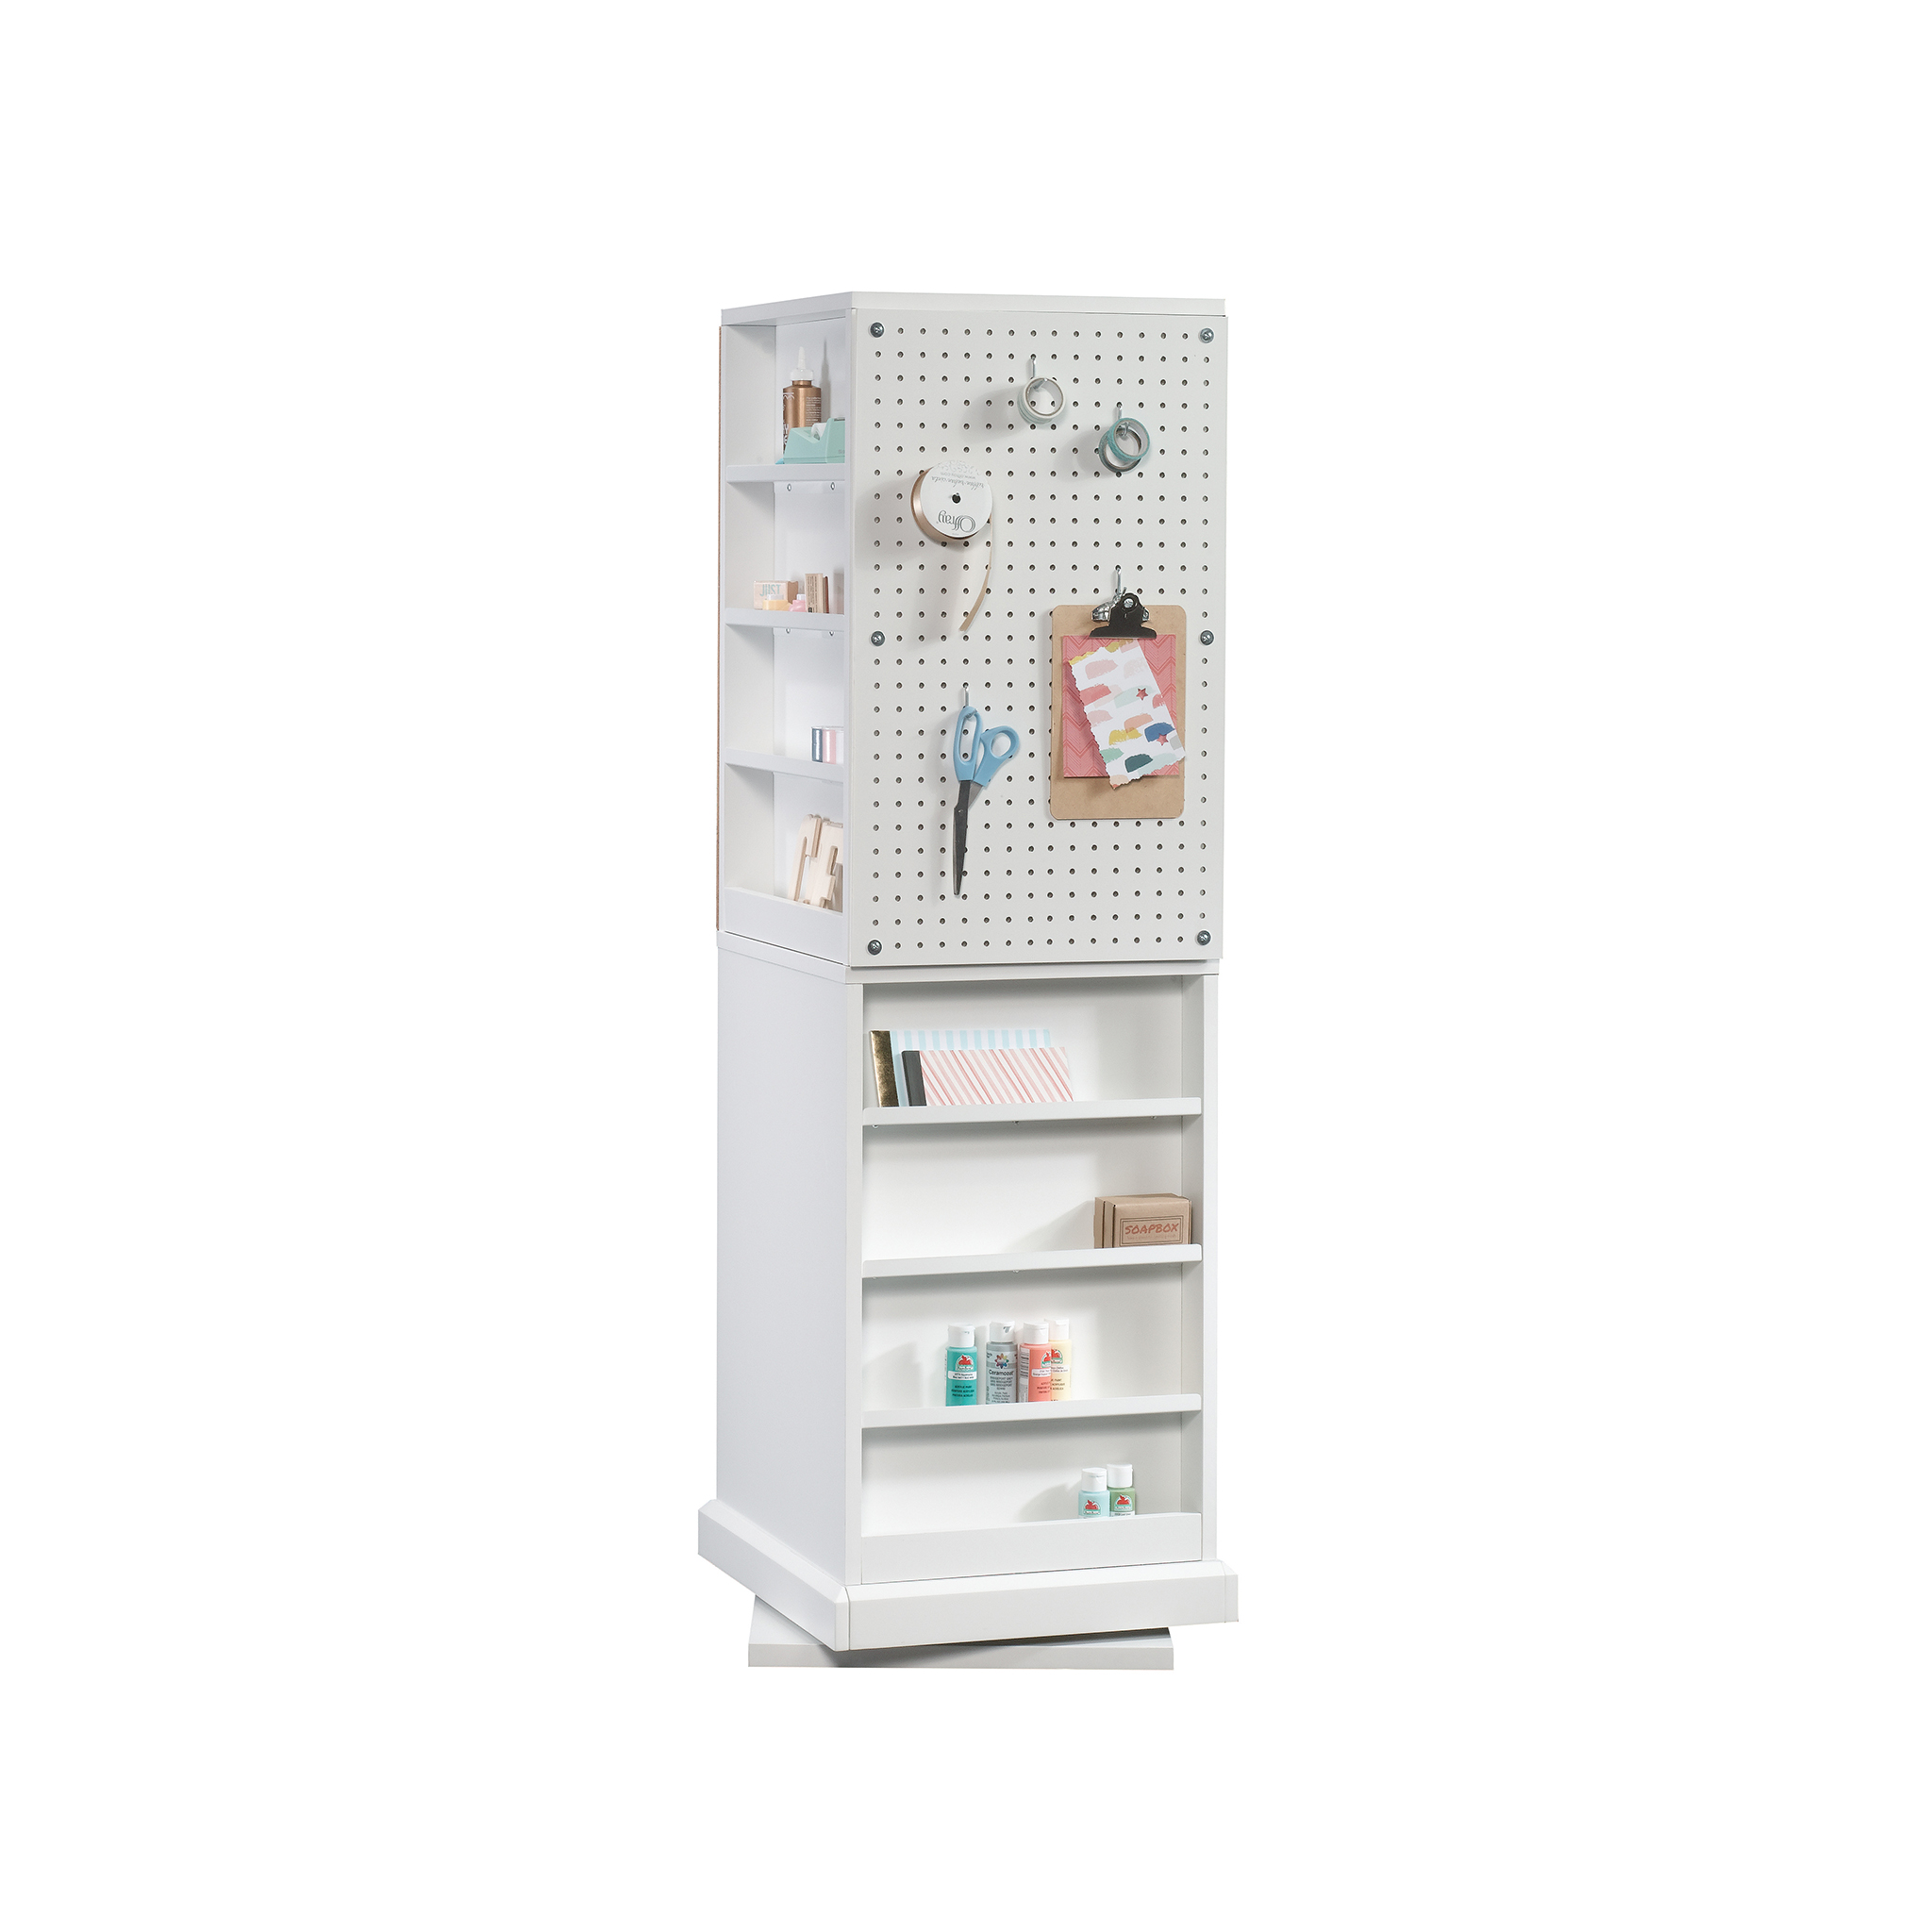 Better Homes & Gardens Craftform Craft Tower, White Finish - image 2 of 14